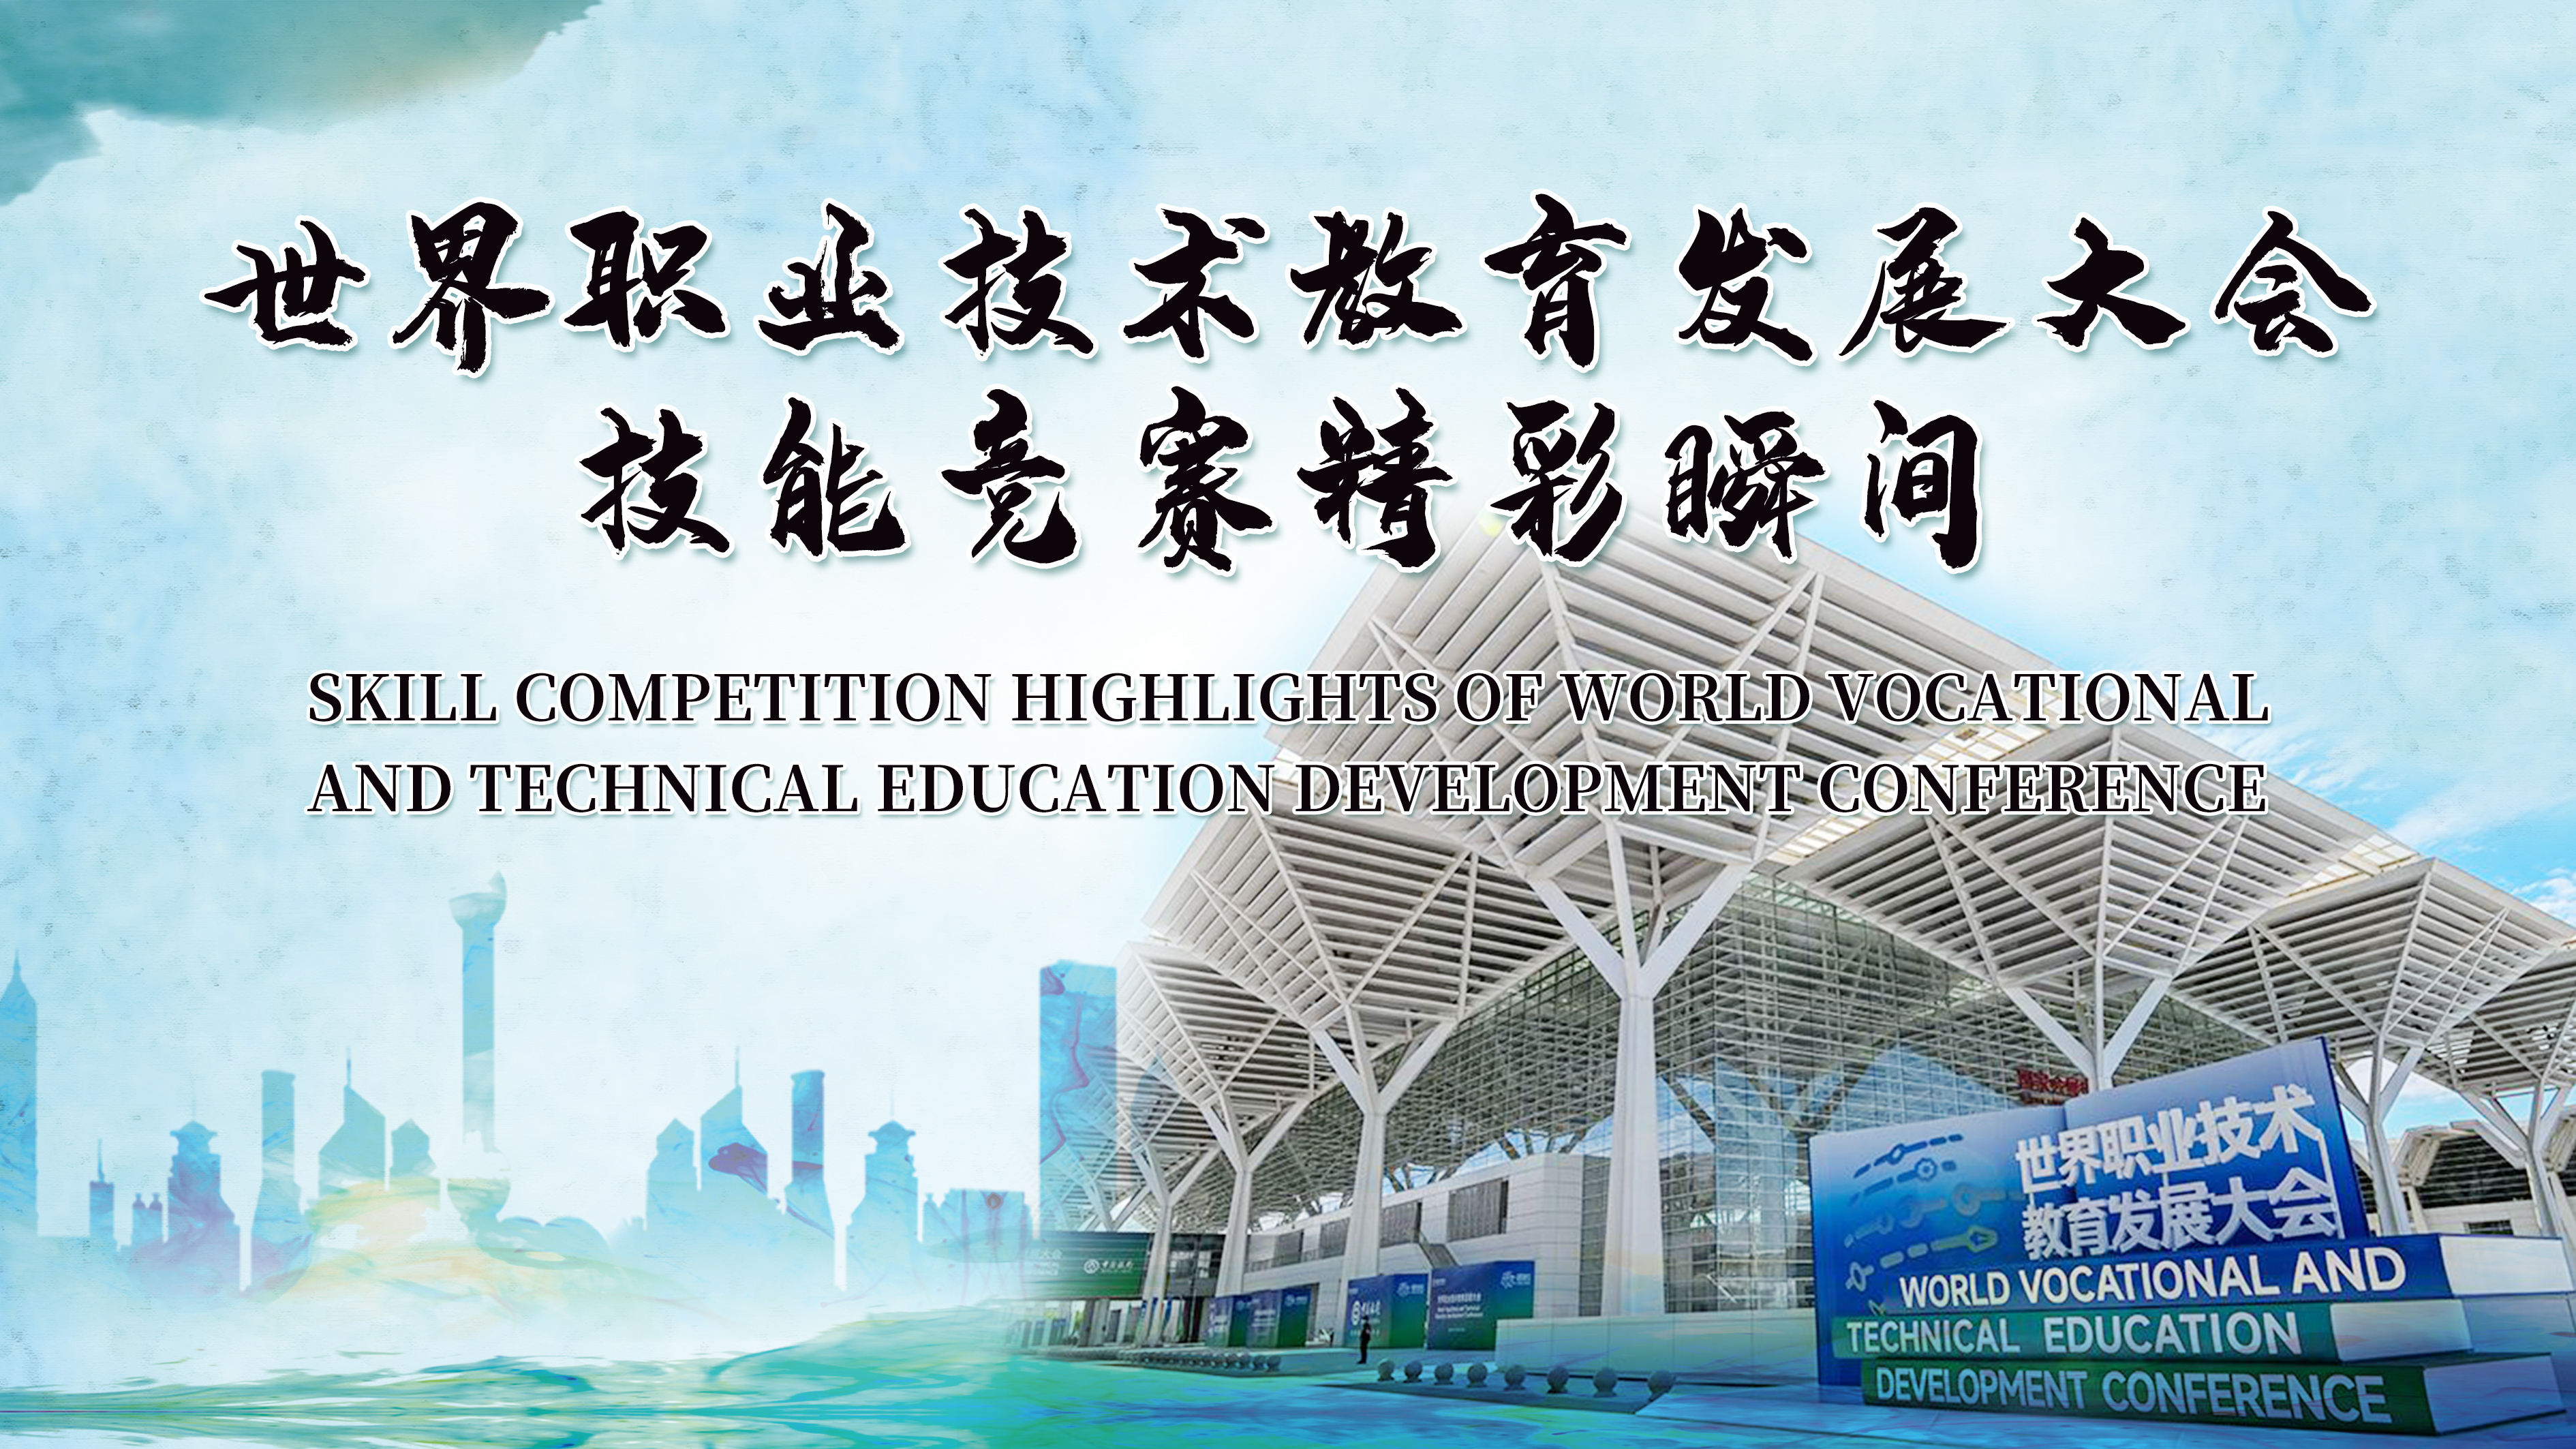 Skill Competition highlights of World Vocational and Technical Education Development Conference